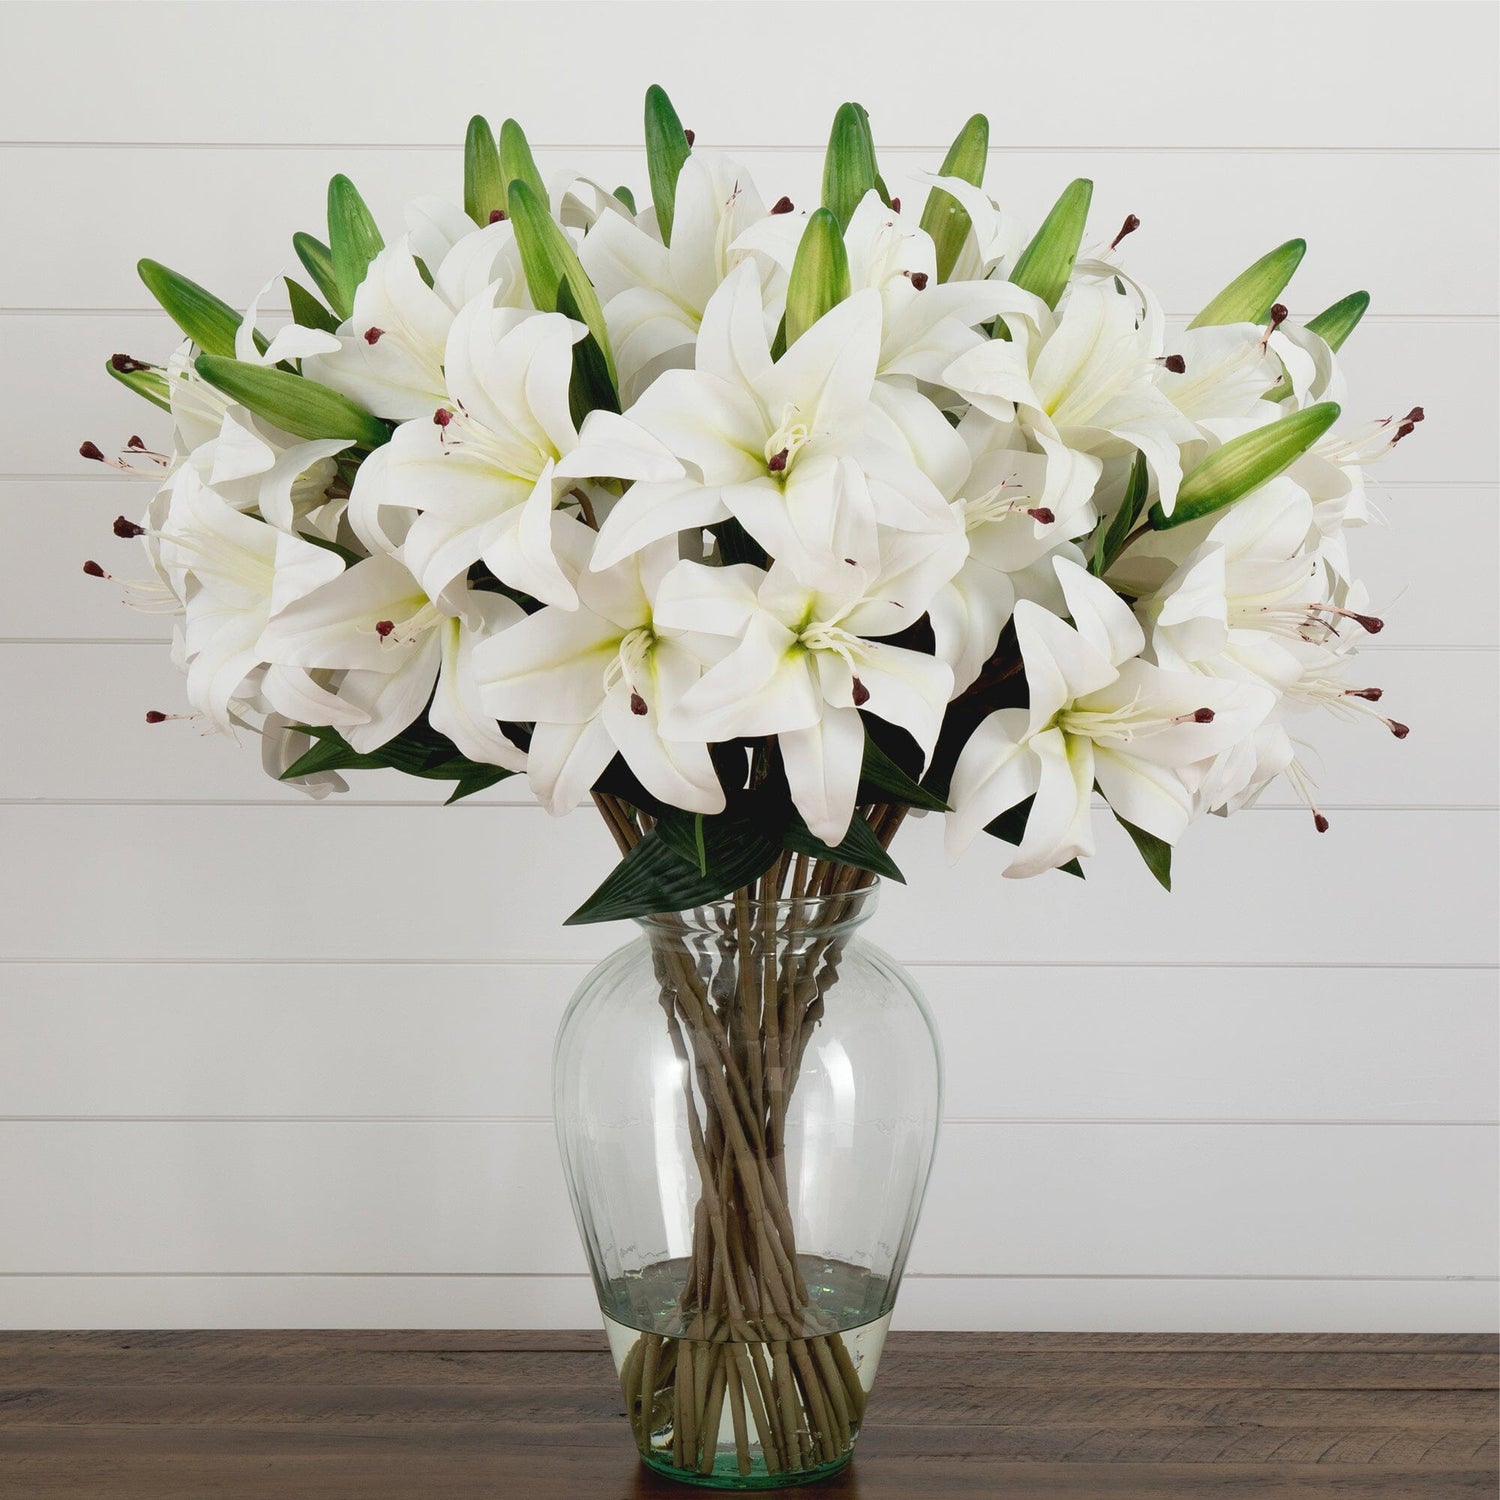 Signature Collection 29” Lily Artificial Arrangement in Glass Vase